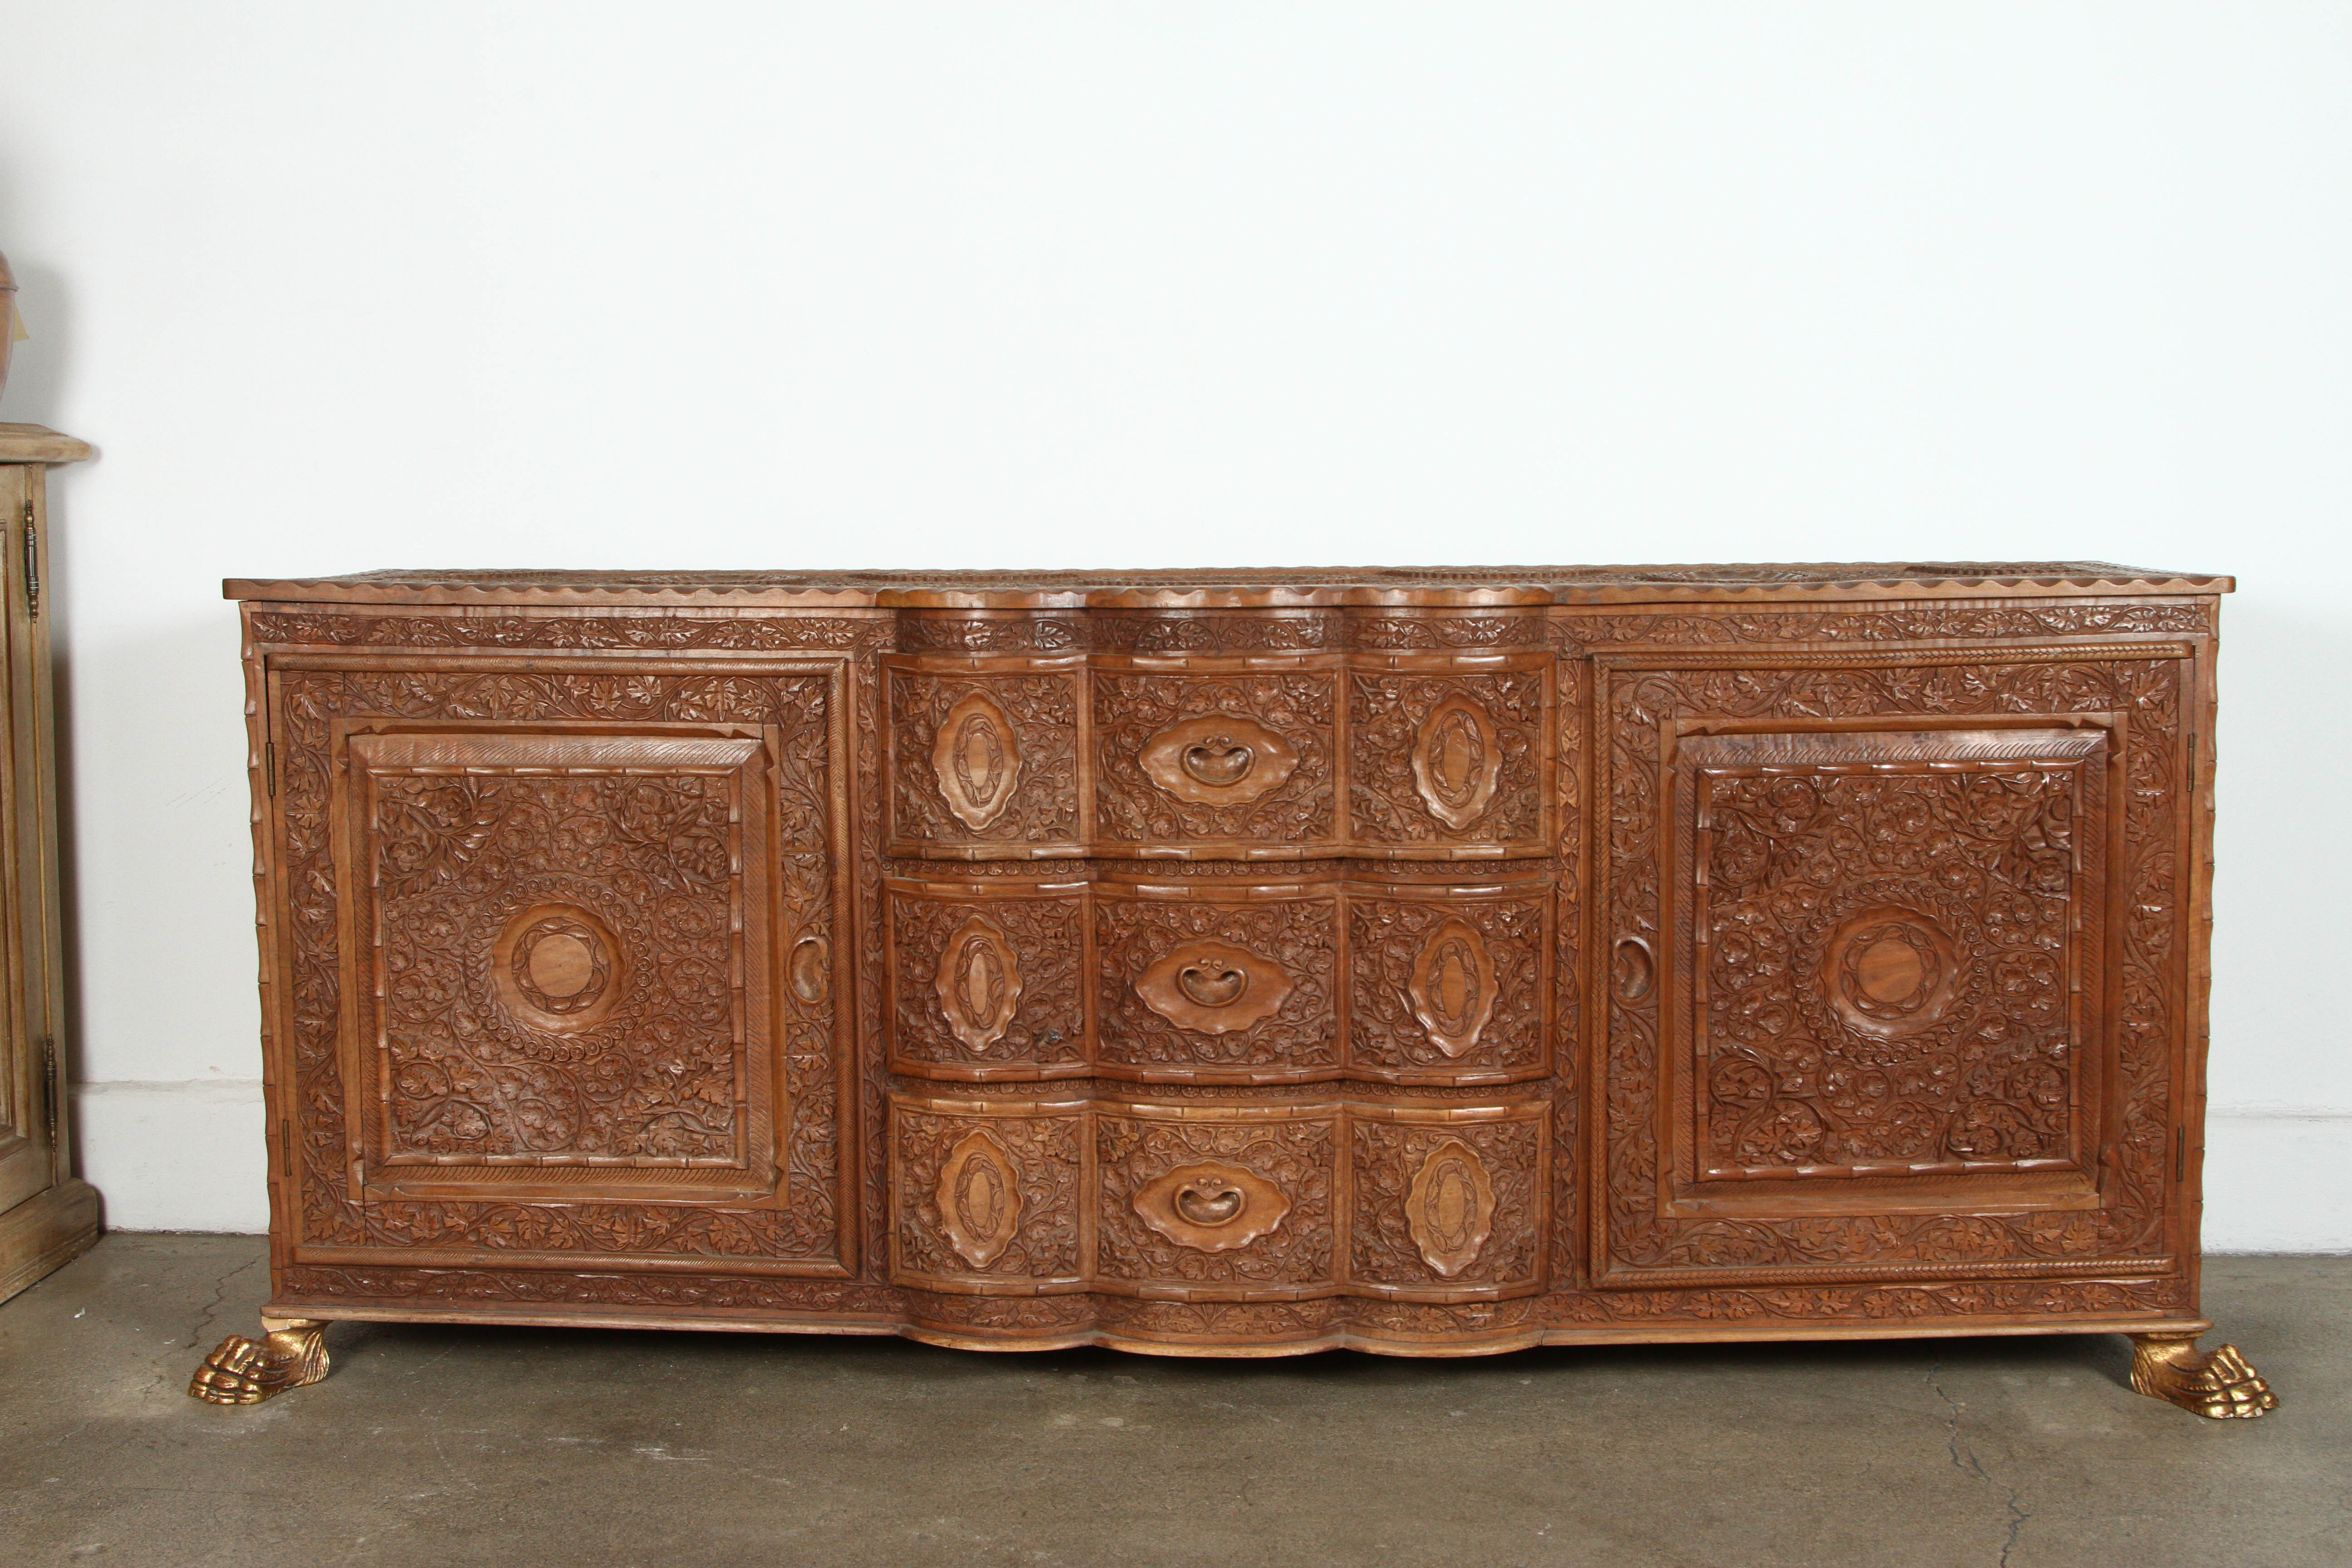 Asian Finely Hand-Carved Sideboard from Java, Indonesia